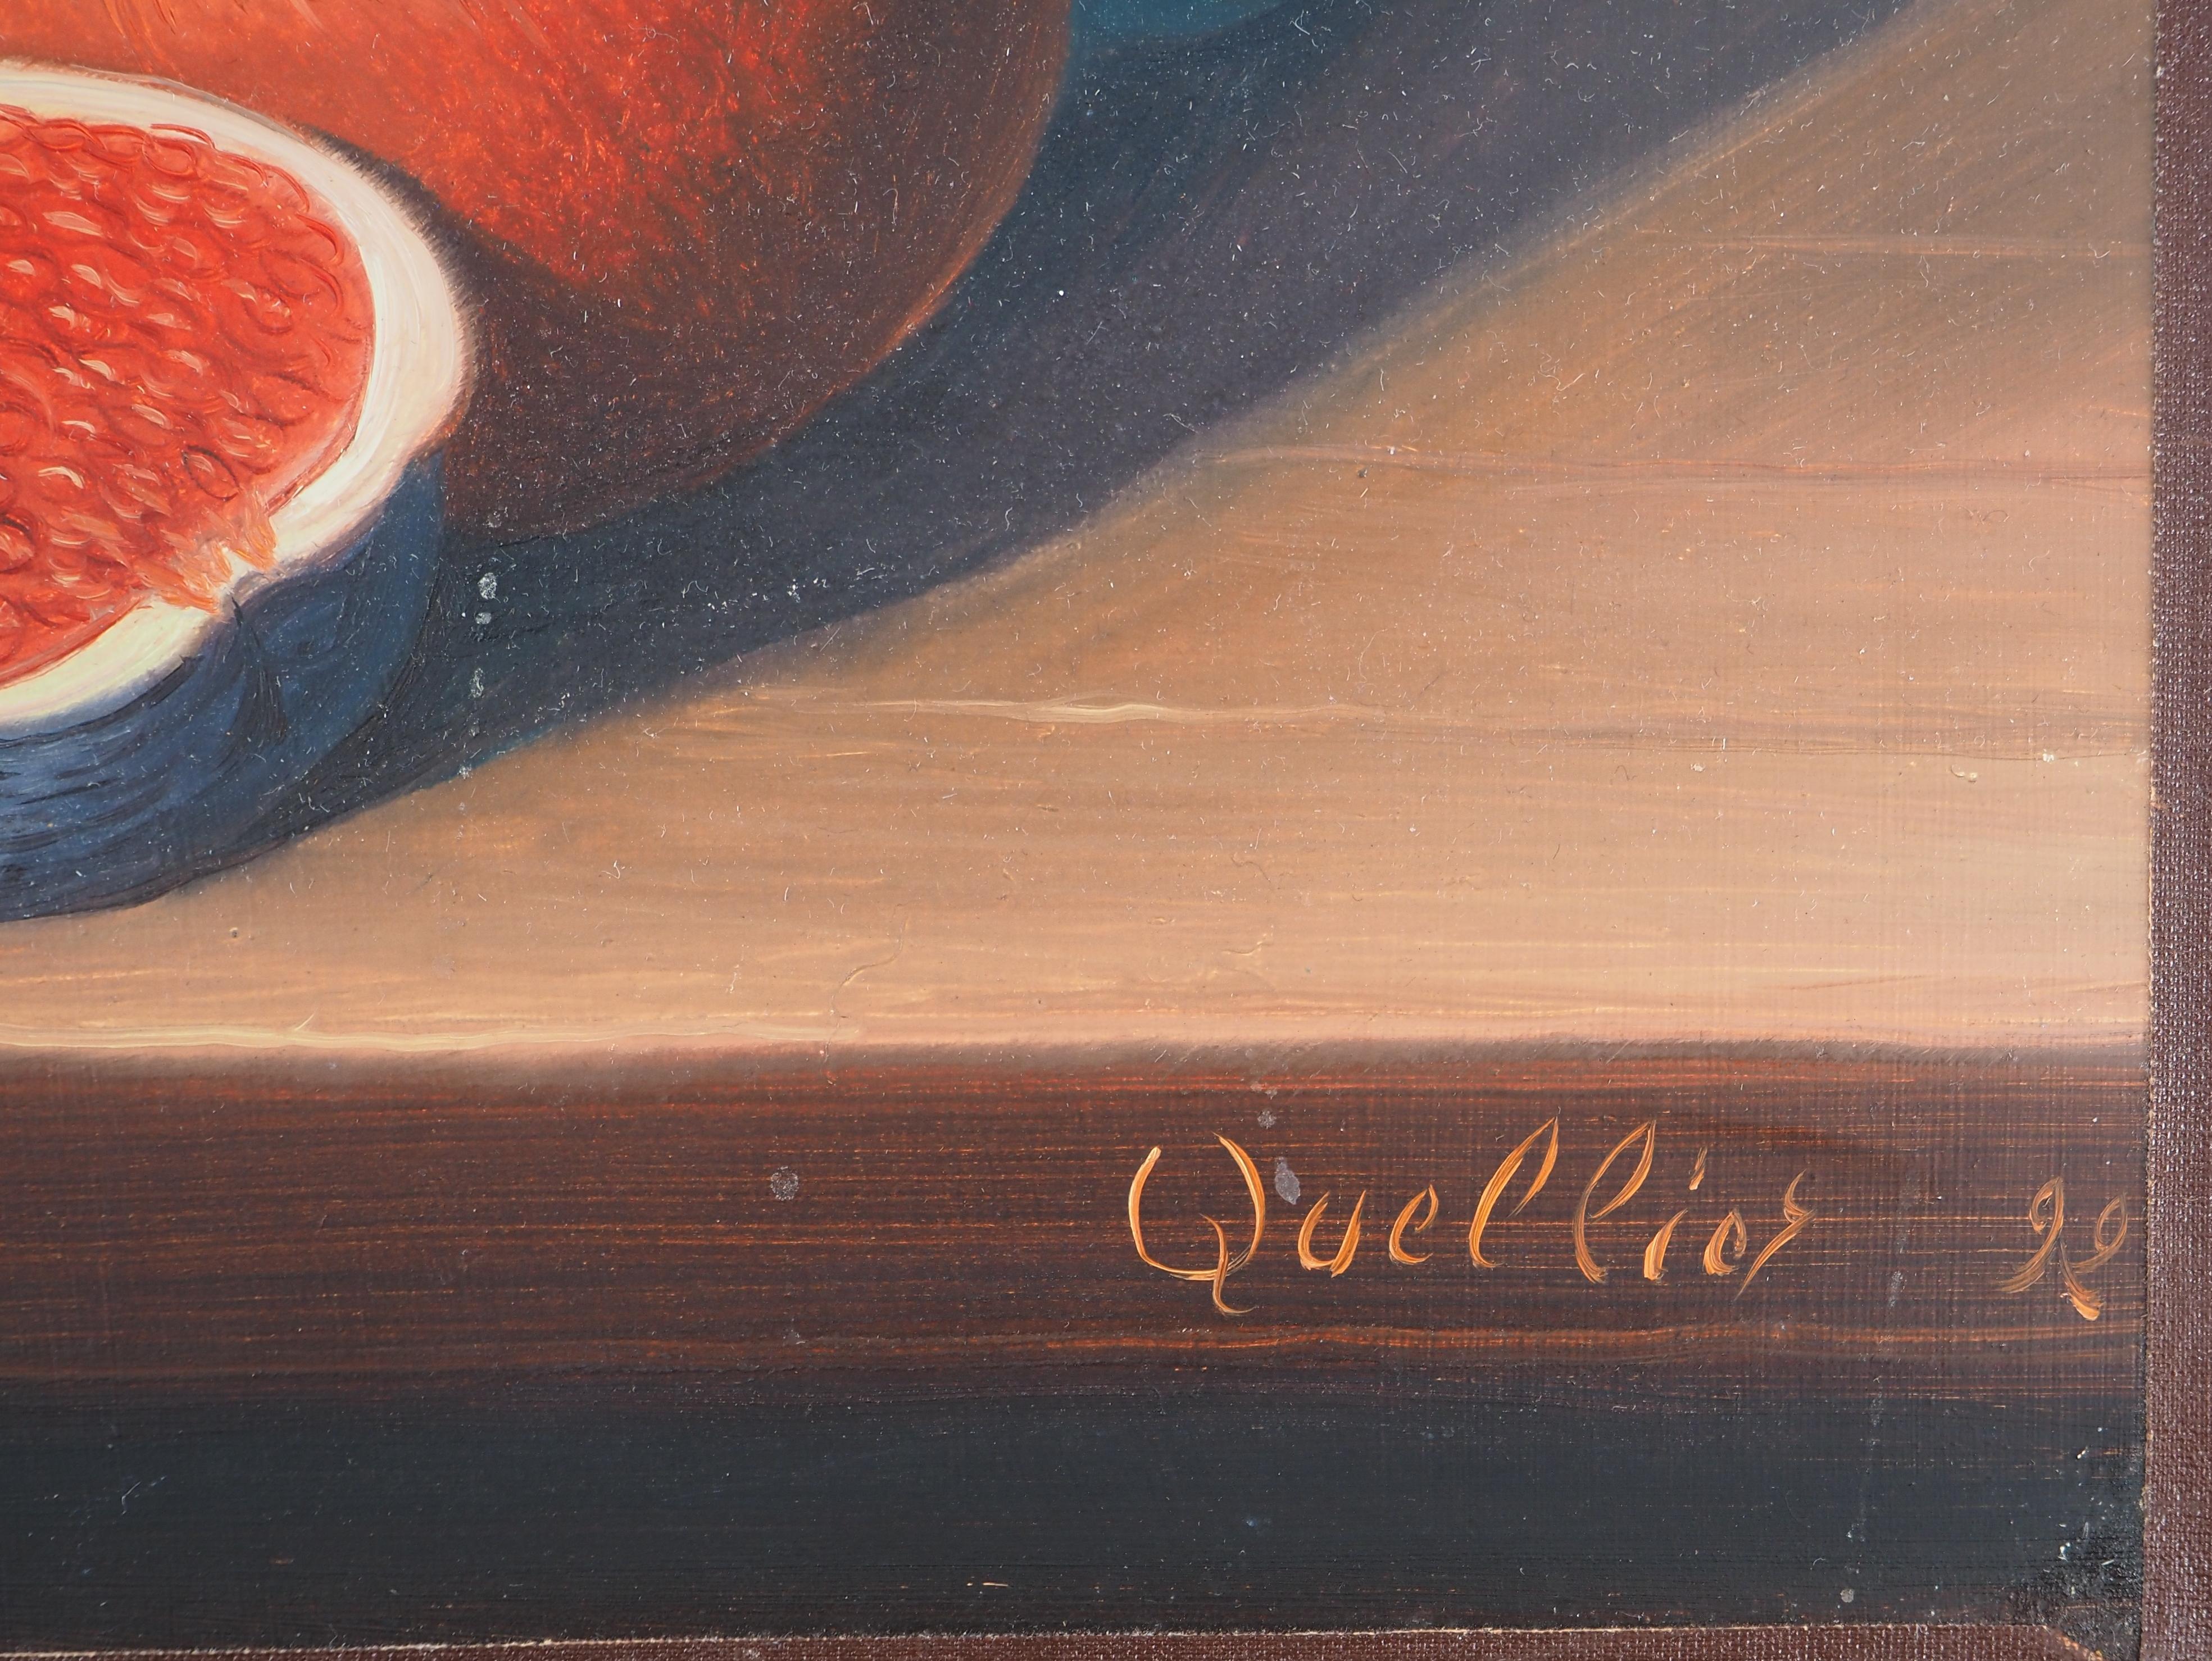 André Quellier (1925-2010)
Still life with Fruits and Leaves, 1992

Original Oil Painting on panel
Signed bottom right
On panel 61 x 50 cm (c. 24 x 20 in)

Very good condition, small surface defects